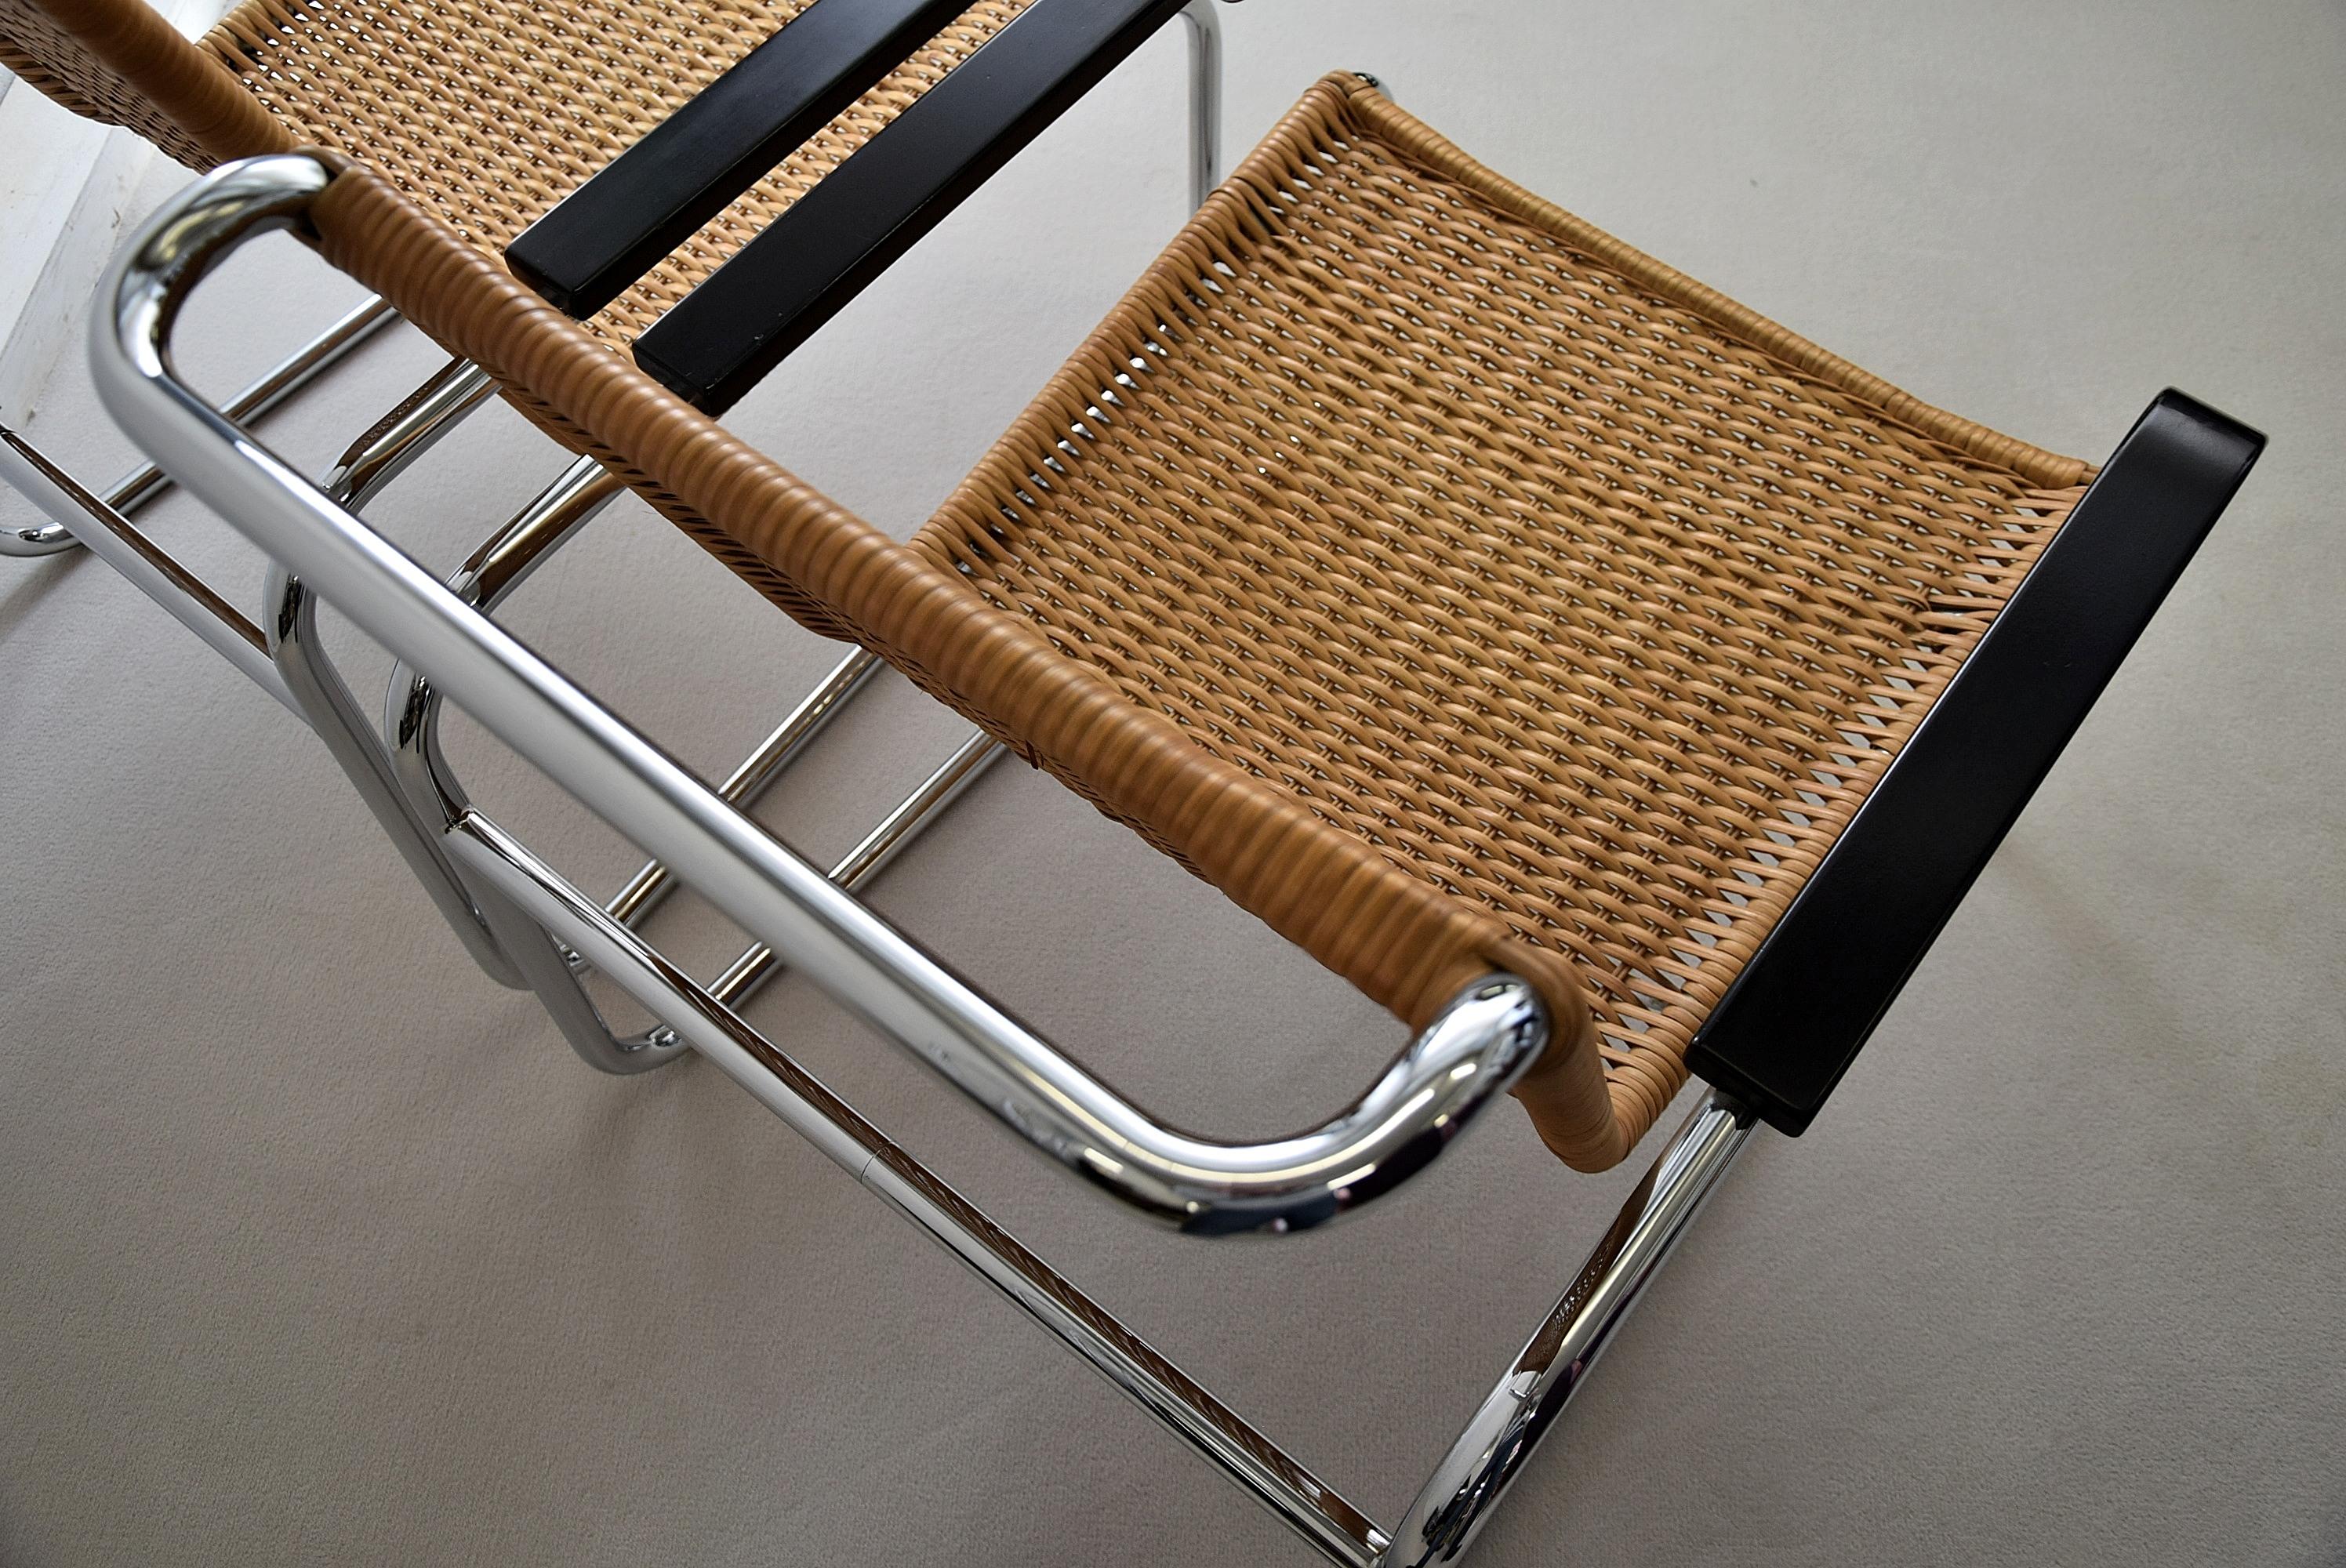 Marcel Breuer armchair S 35. Among all the cantilever chairs of the Bauhaus epoch, the armchair S 35, with its lightness, flexibility and comfort, casts a shadow over everything heavy and inert. In 1930, the modern lifestyle communicated by the S 35